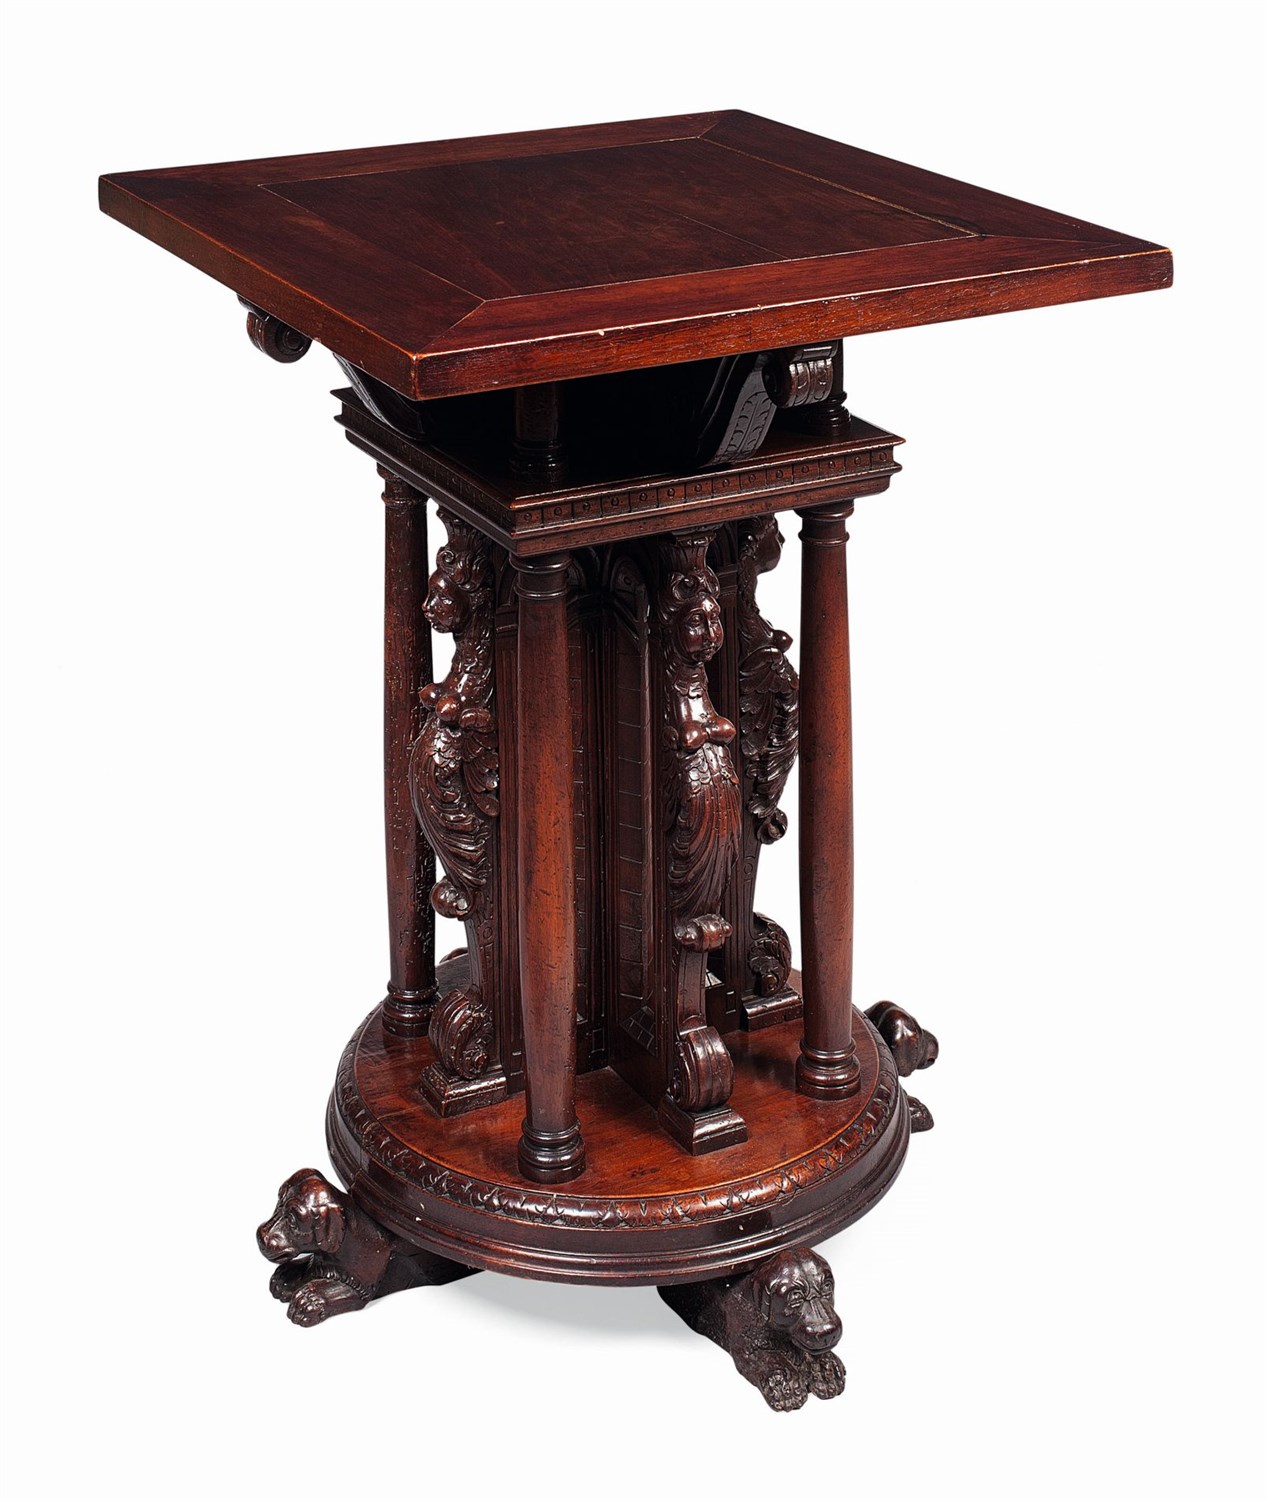 Lot 29 - FRENCH WALNUT CENTRE TABLE